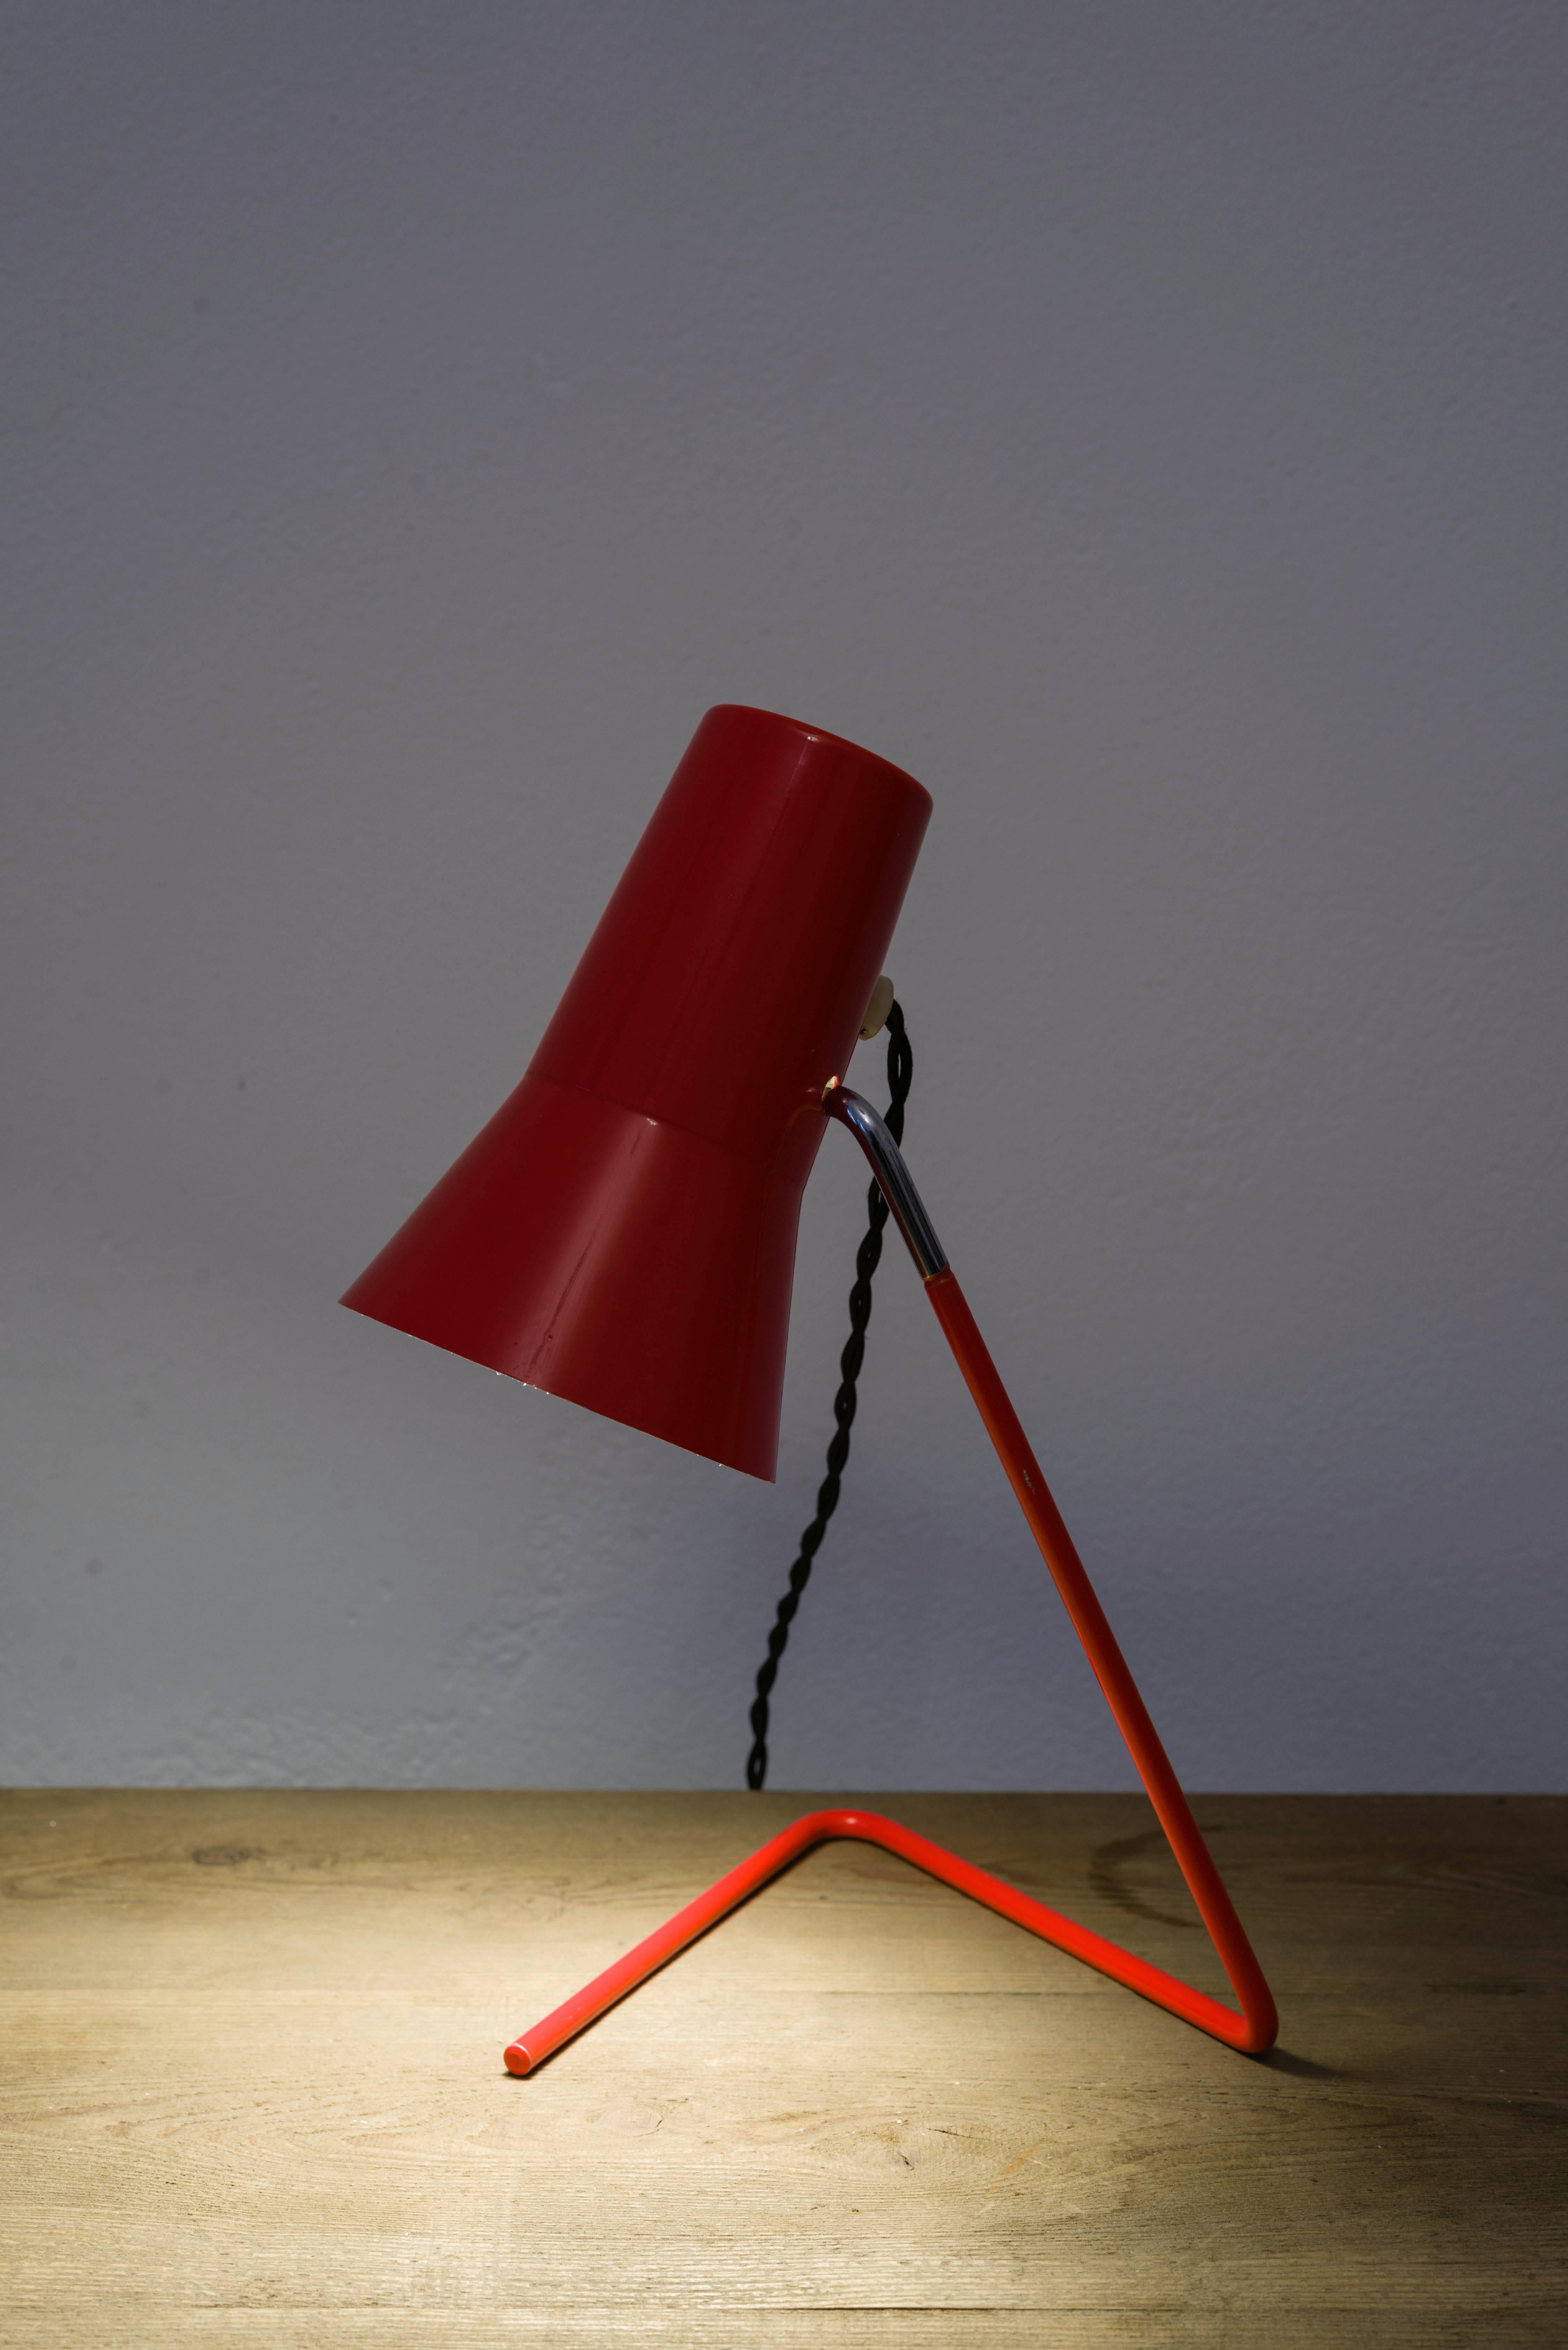 This table lamp was designed by Josef Hurka and manufactured by Napako in the Czech Republic in 1950. It features a tripod with shade made from lacquered steel plate. The shade is height adjustable. The lamp was rewired and remains in a very good